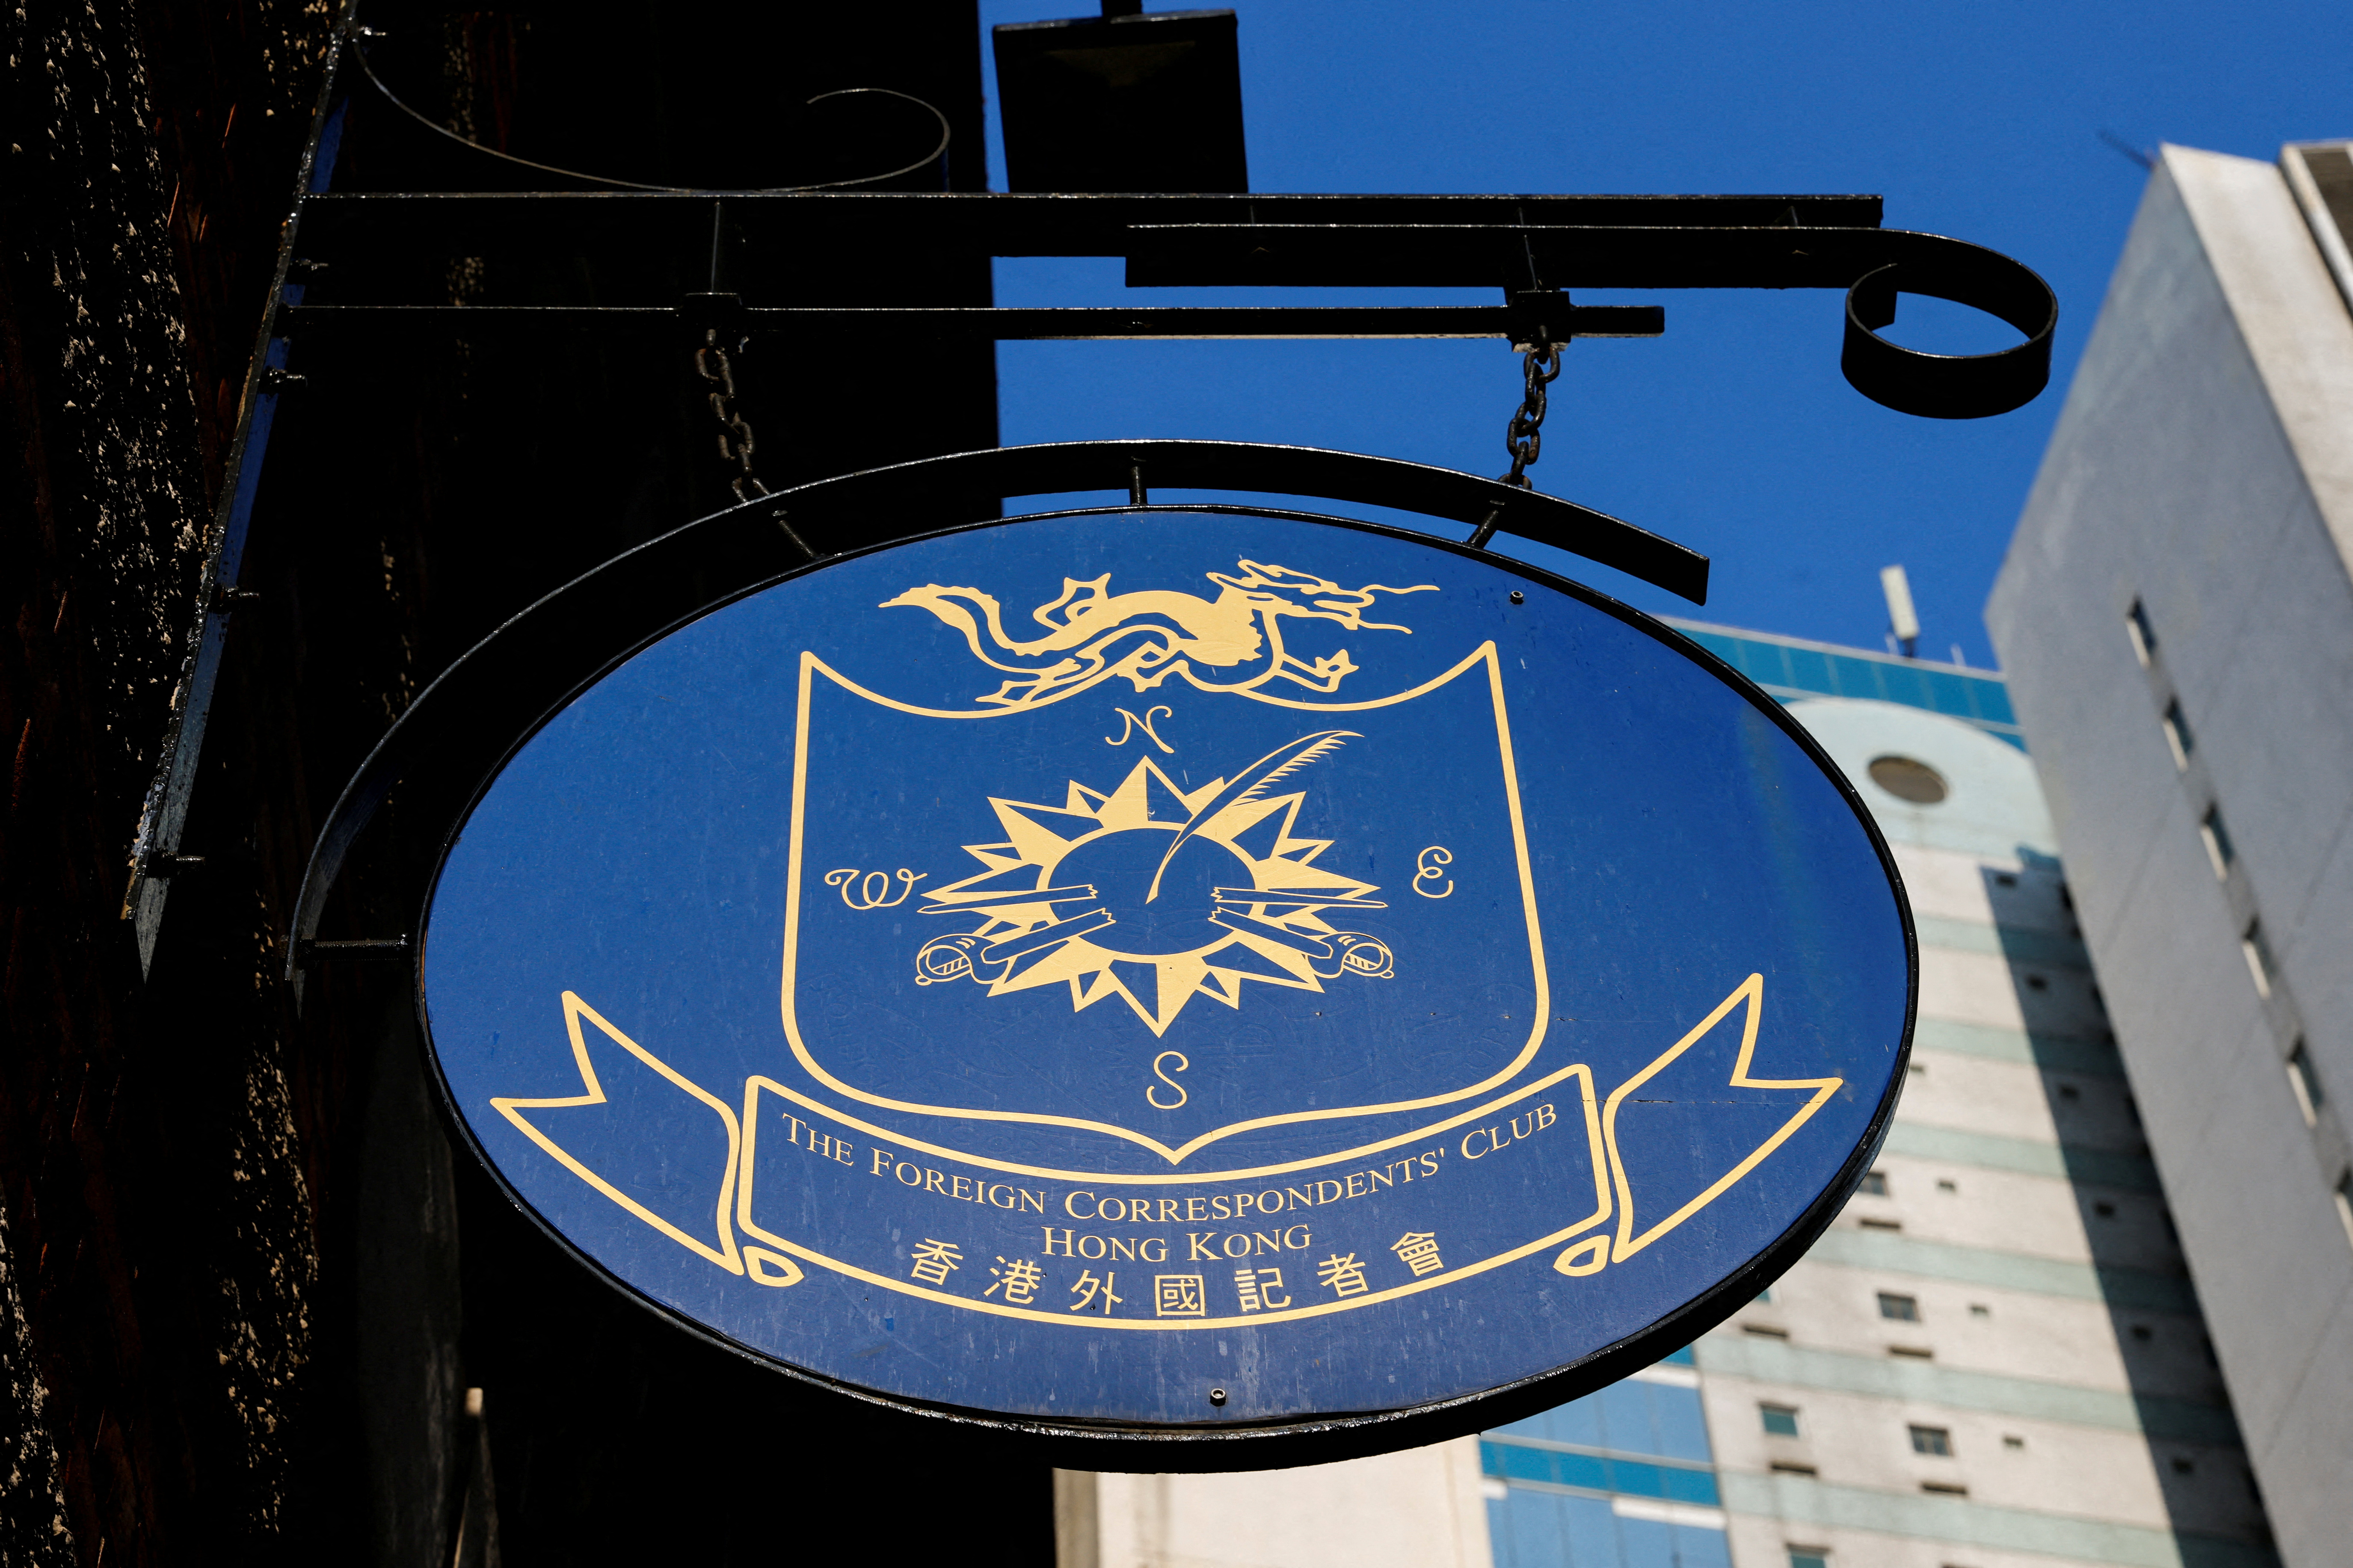 The logo of Foreign Correspondents' Club (FCC) is seen outside its building in Hong Kong